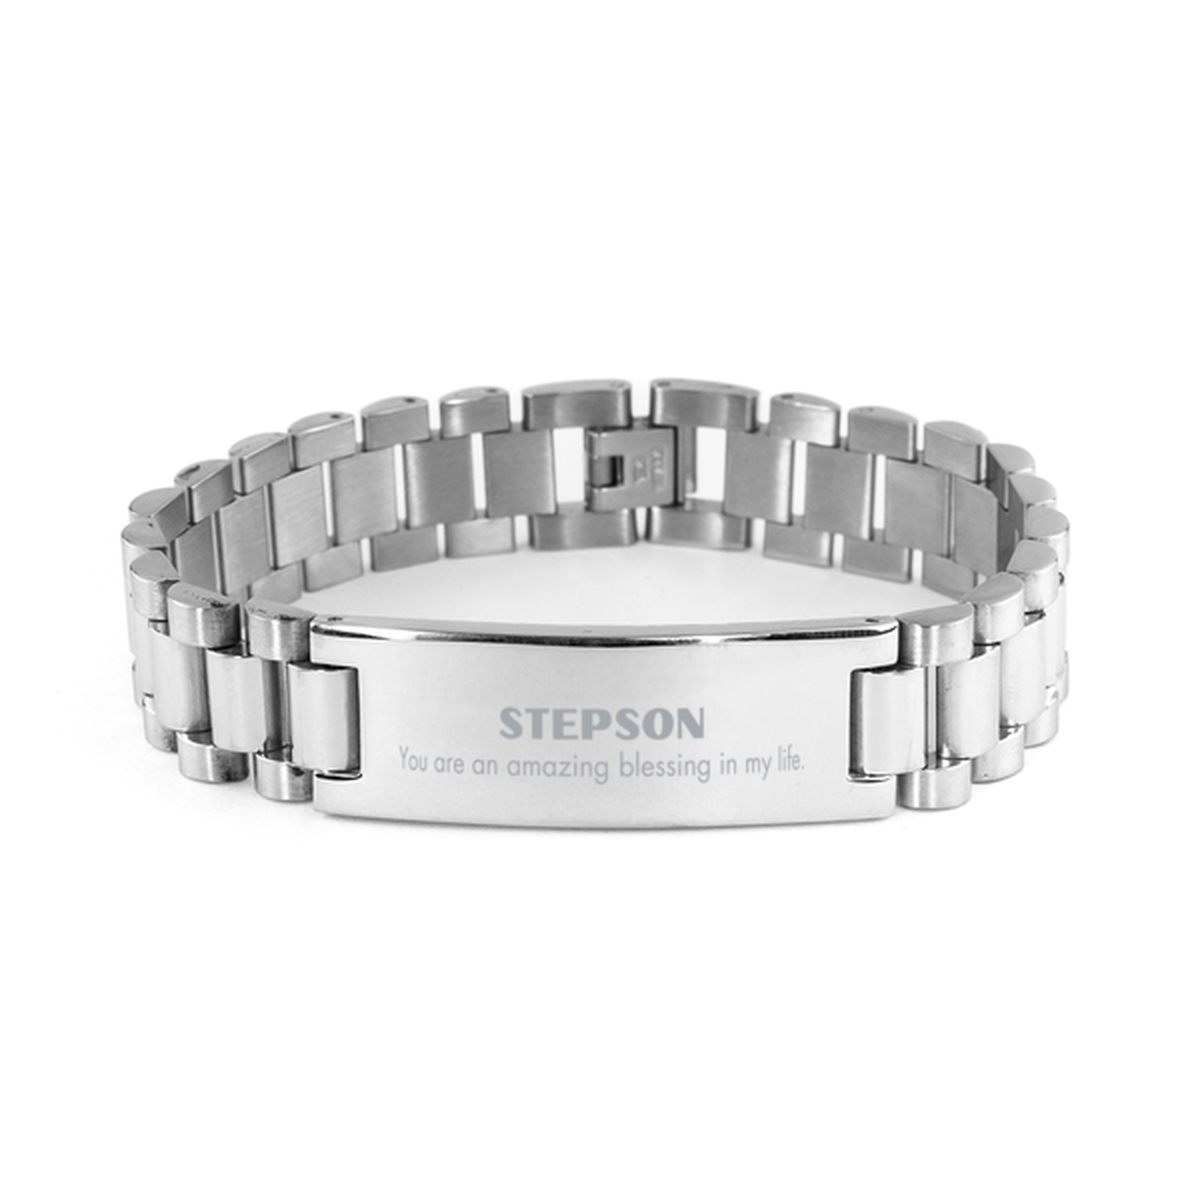 Stepson Ladder Stainless Steel Bracelet, You are an amazing blessing in my life, Thank You Gifts For Stepson, Inspirational Birthday Christmas Unique Gifts For Stepson